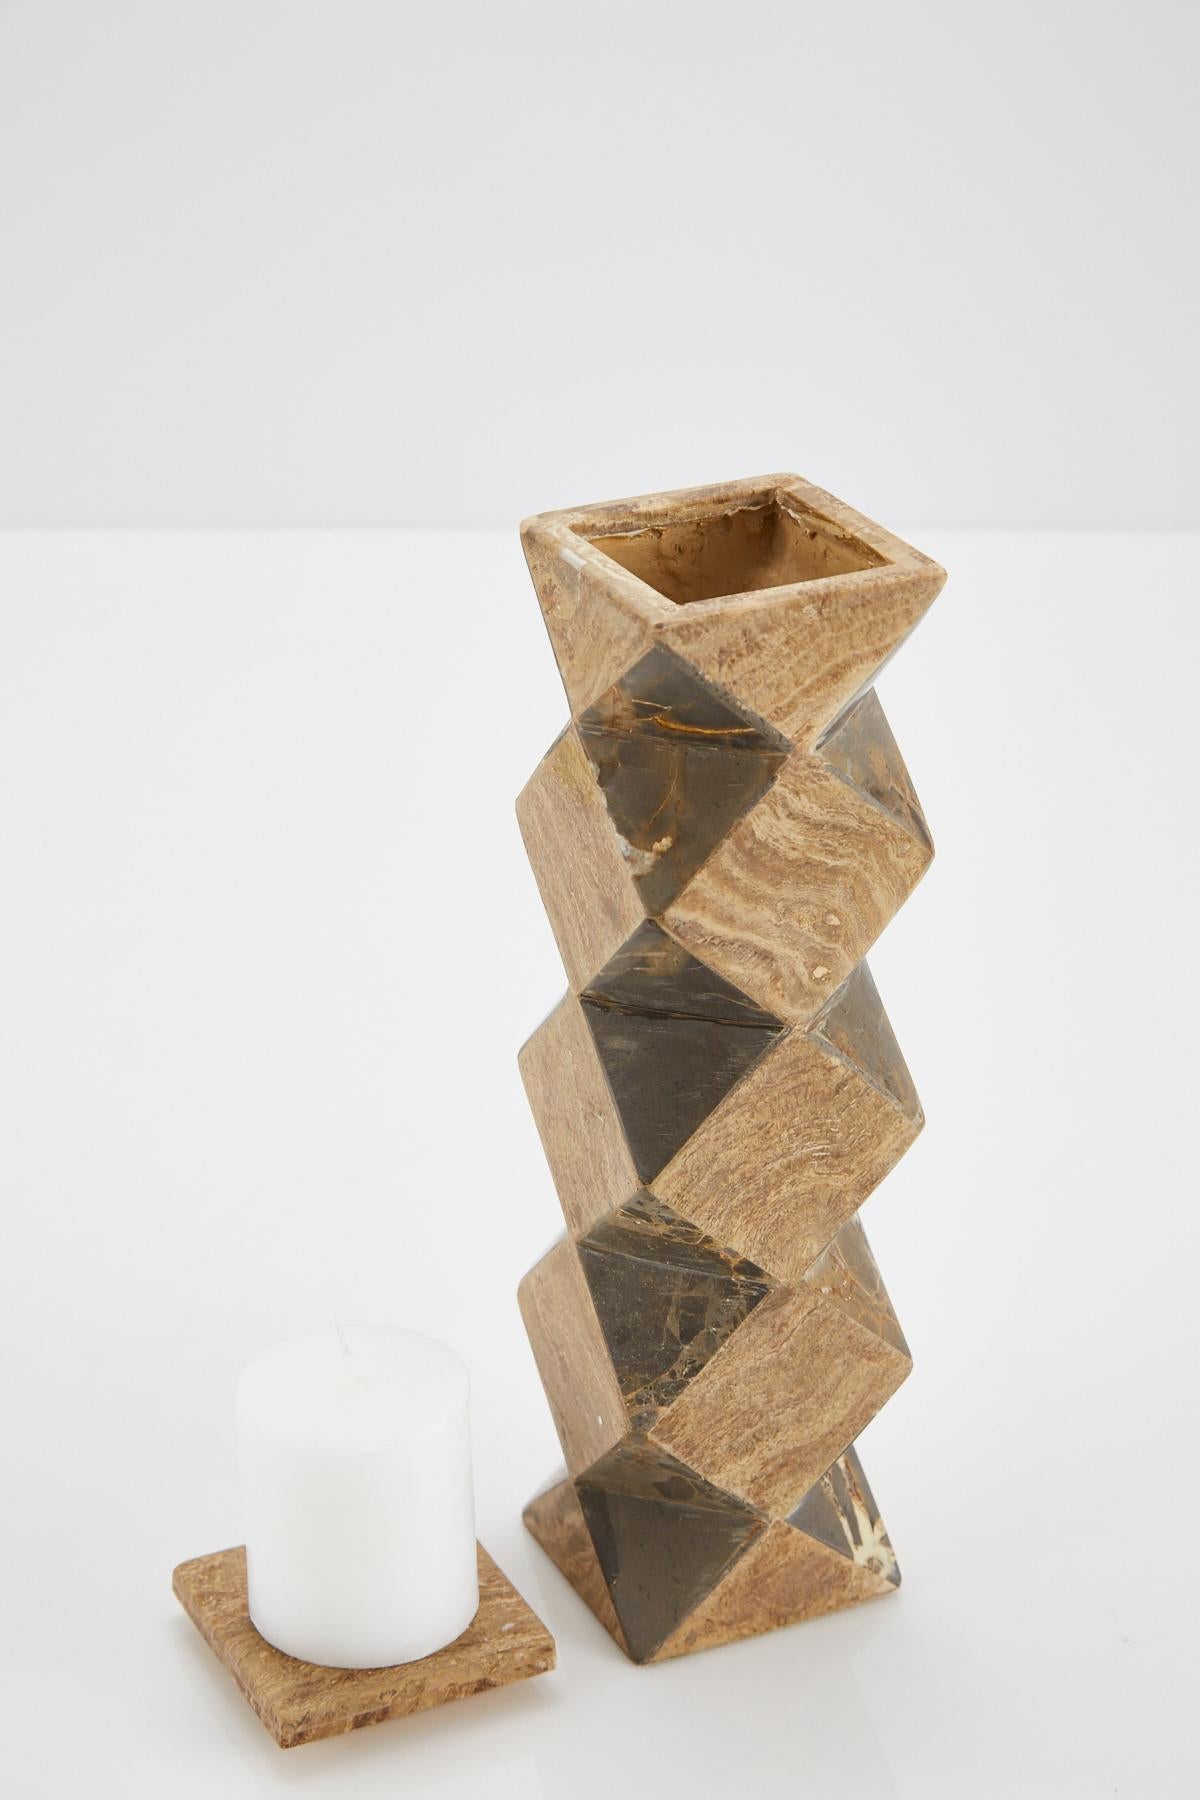 Convertible Faceted Postmodern Tessellated Stone Candlestick or Vase, 1990s (Gemalt) im Angebot